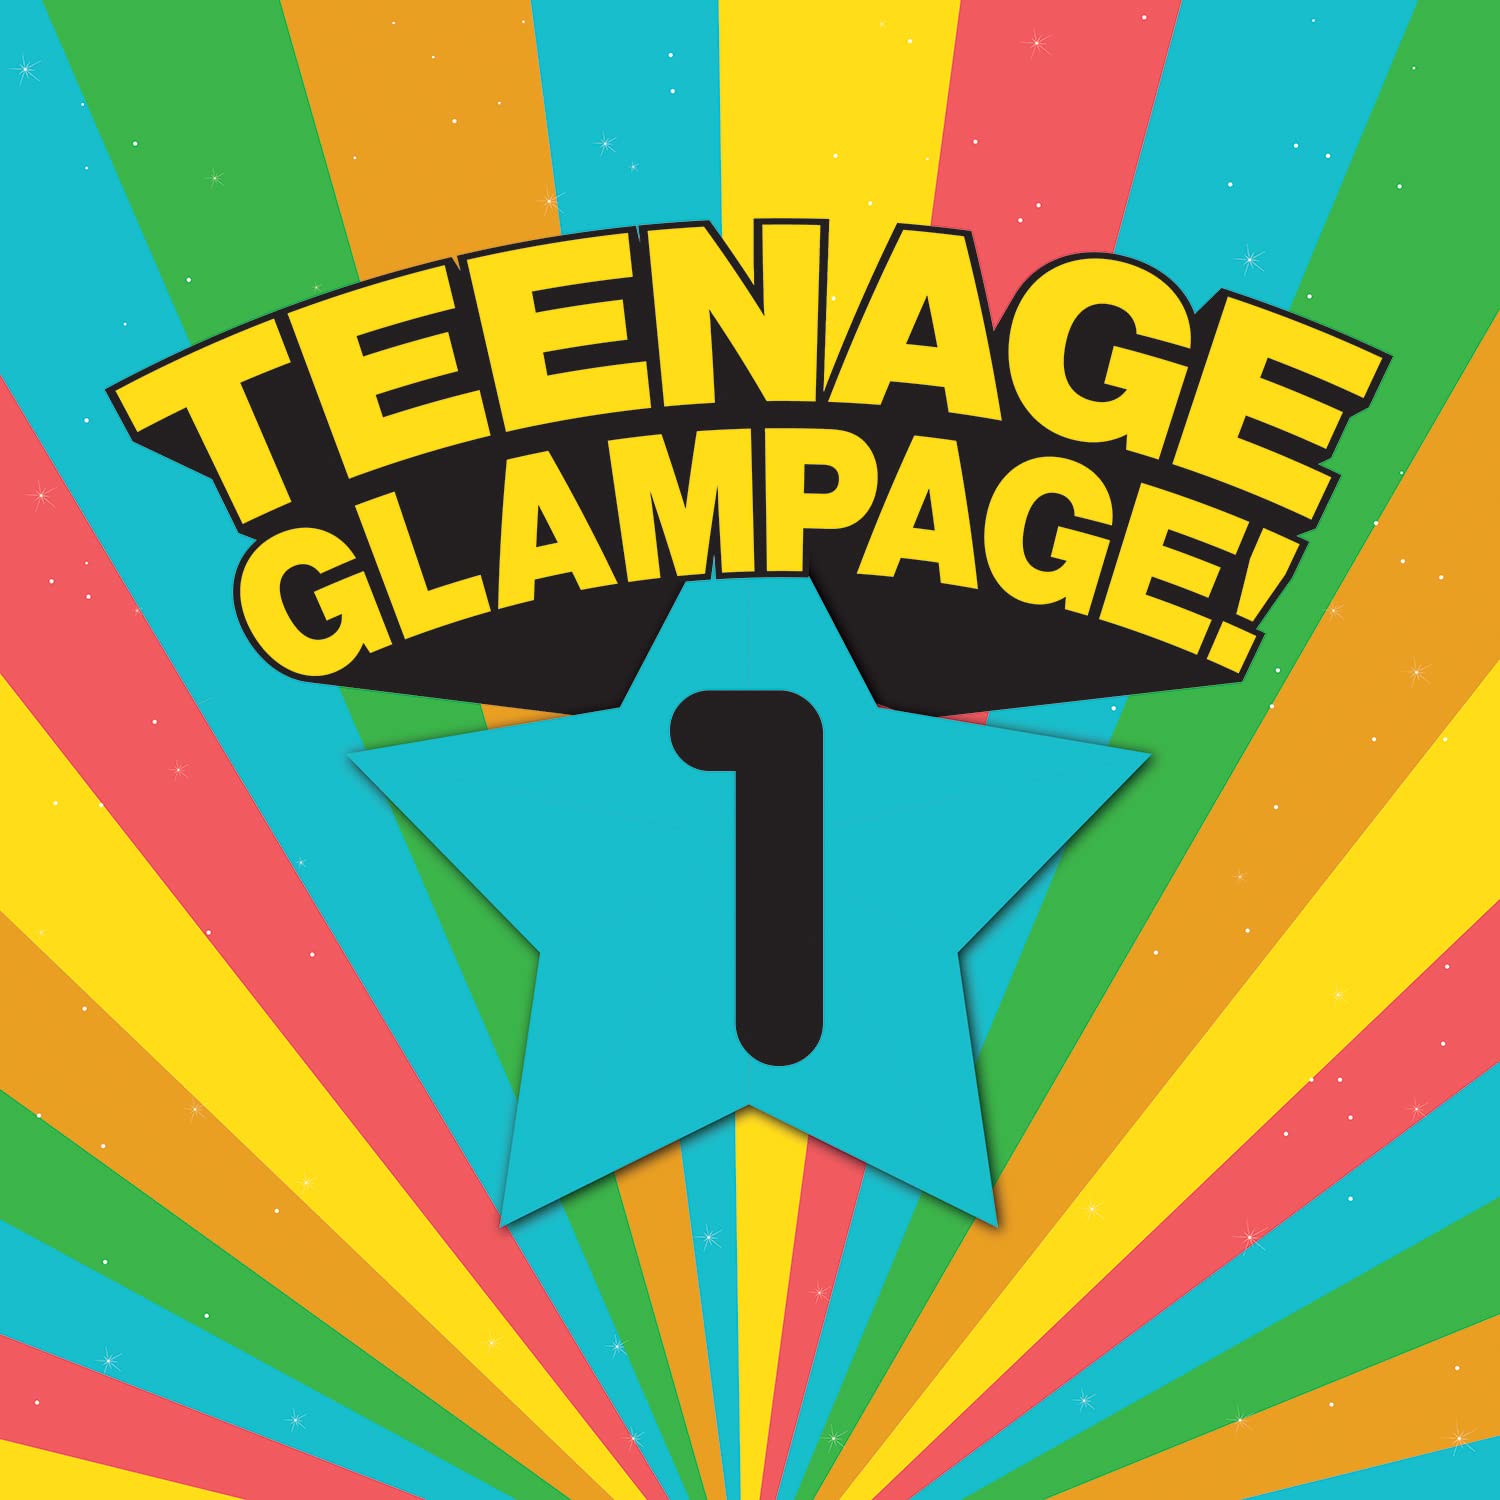 Teenage Glampage-Can the Glam Vol.2 (4cd Box)